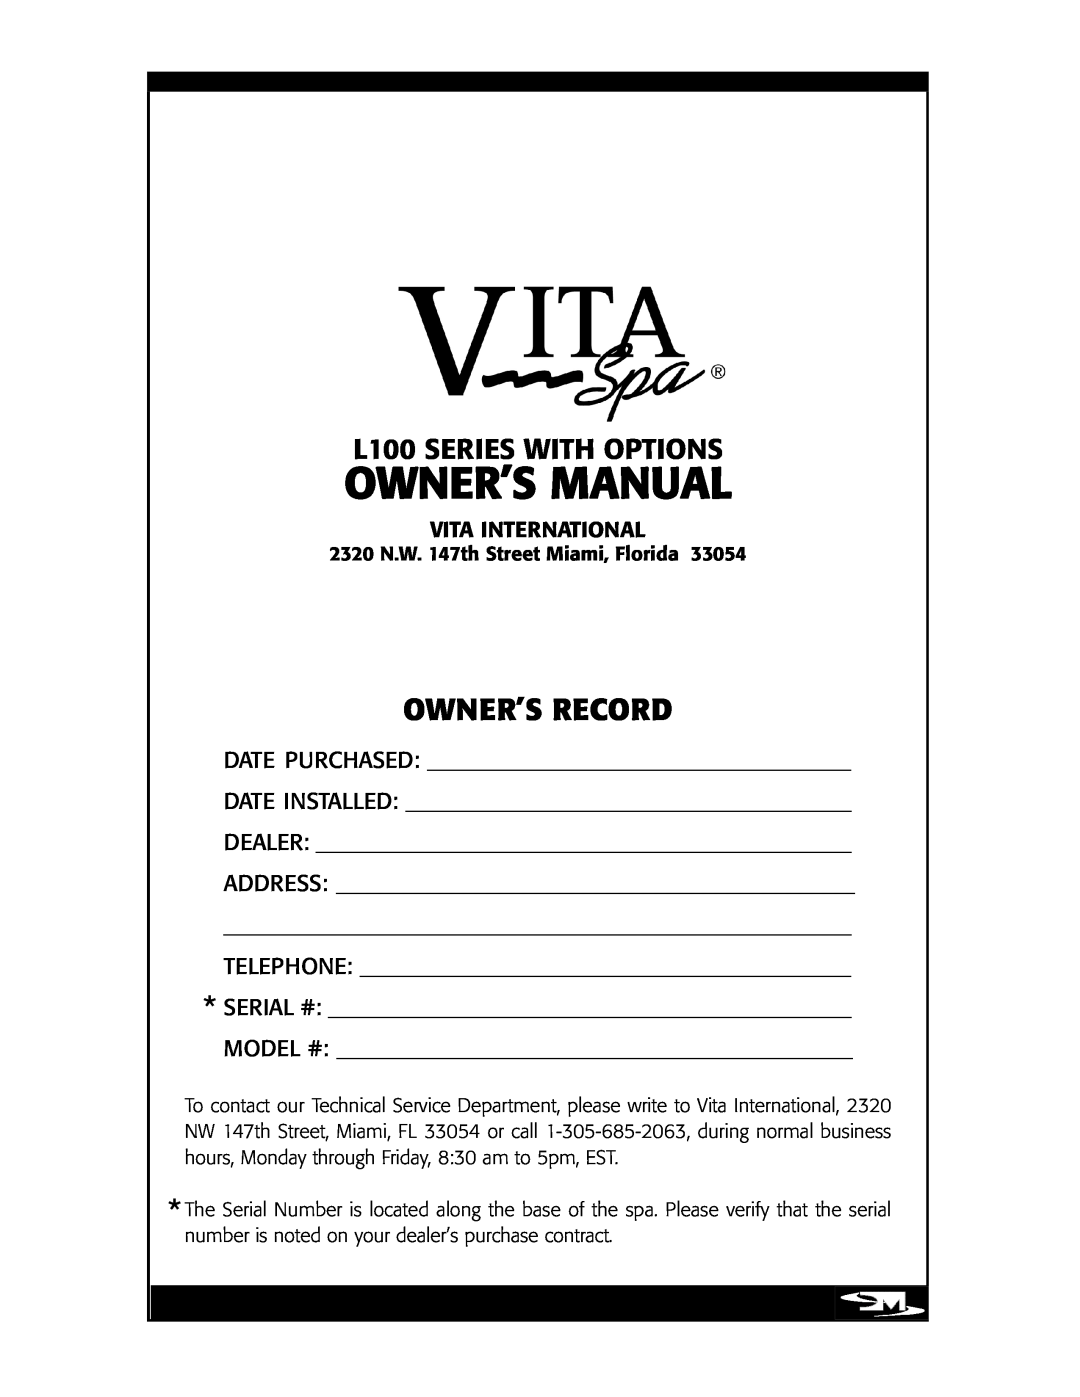 Vita Spa owner manual Owner’S Record, L100 SERIES WITH OPTIONS 